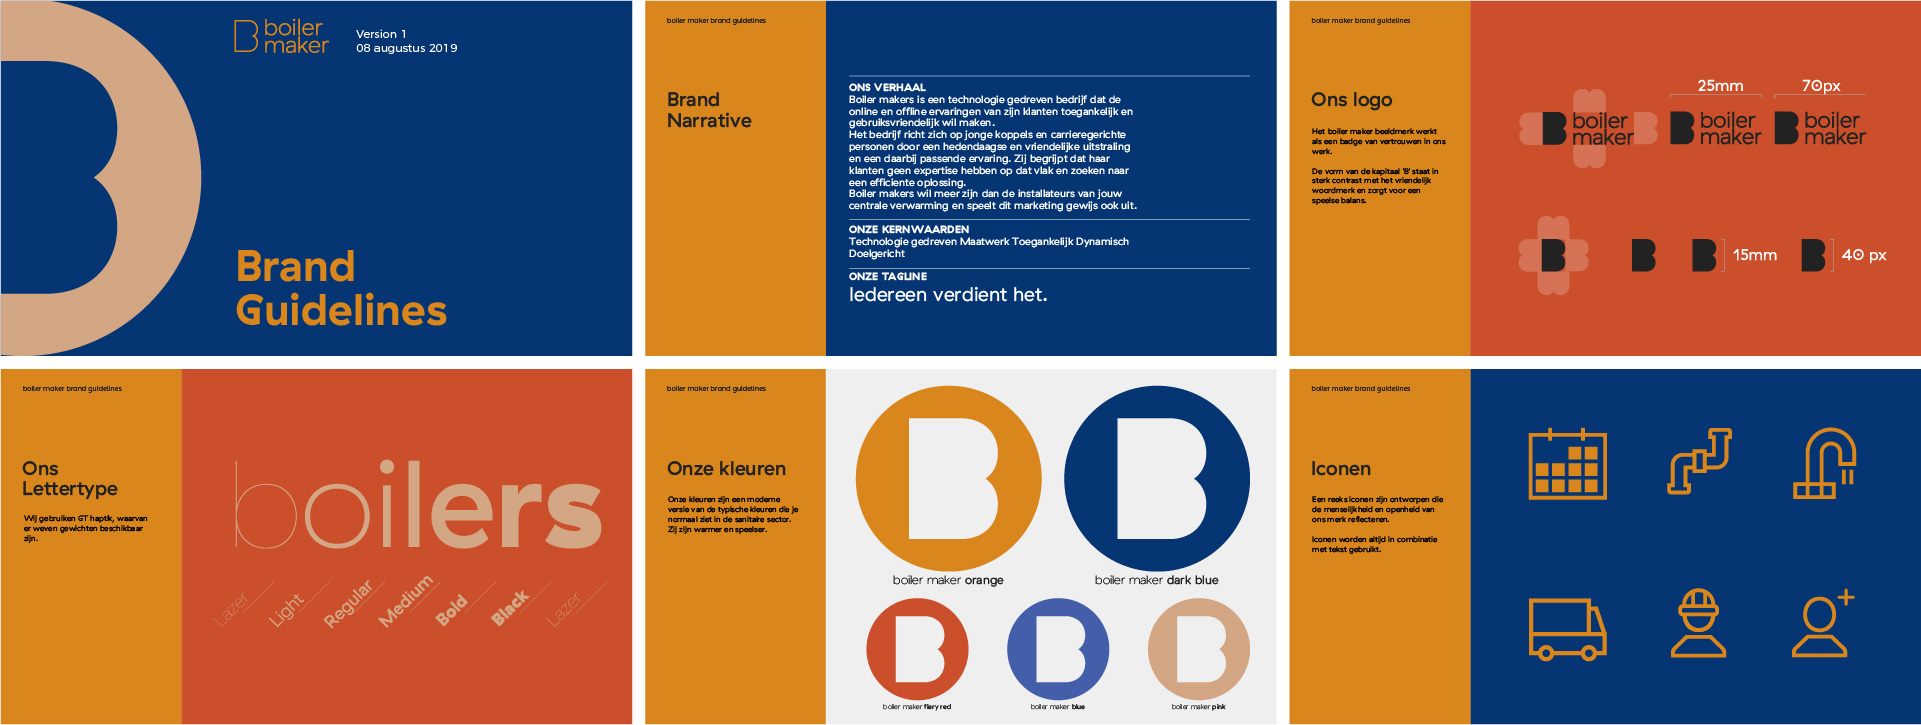 selected pages of boiler maker's brand guidelines containing pages on the brand narrative, the logo, typography, colour and icons